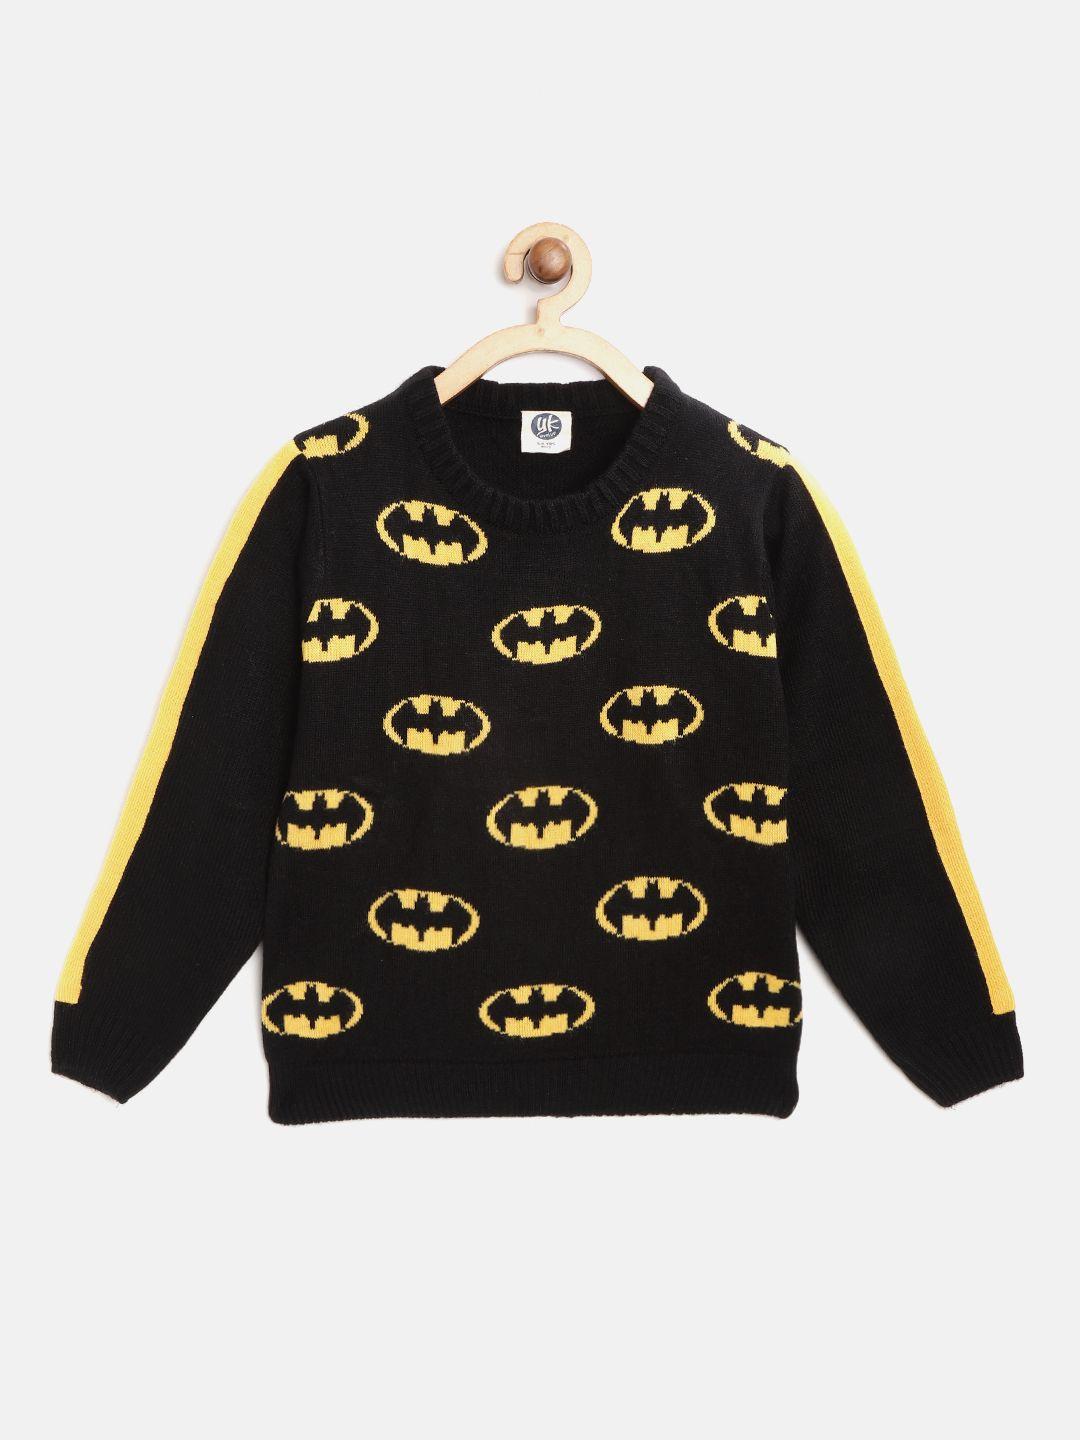 yk-justice-league-boys-black-&-yellow-batman-patterned-pullover